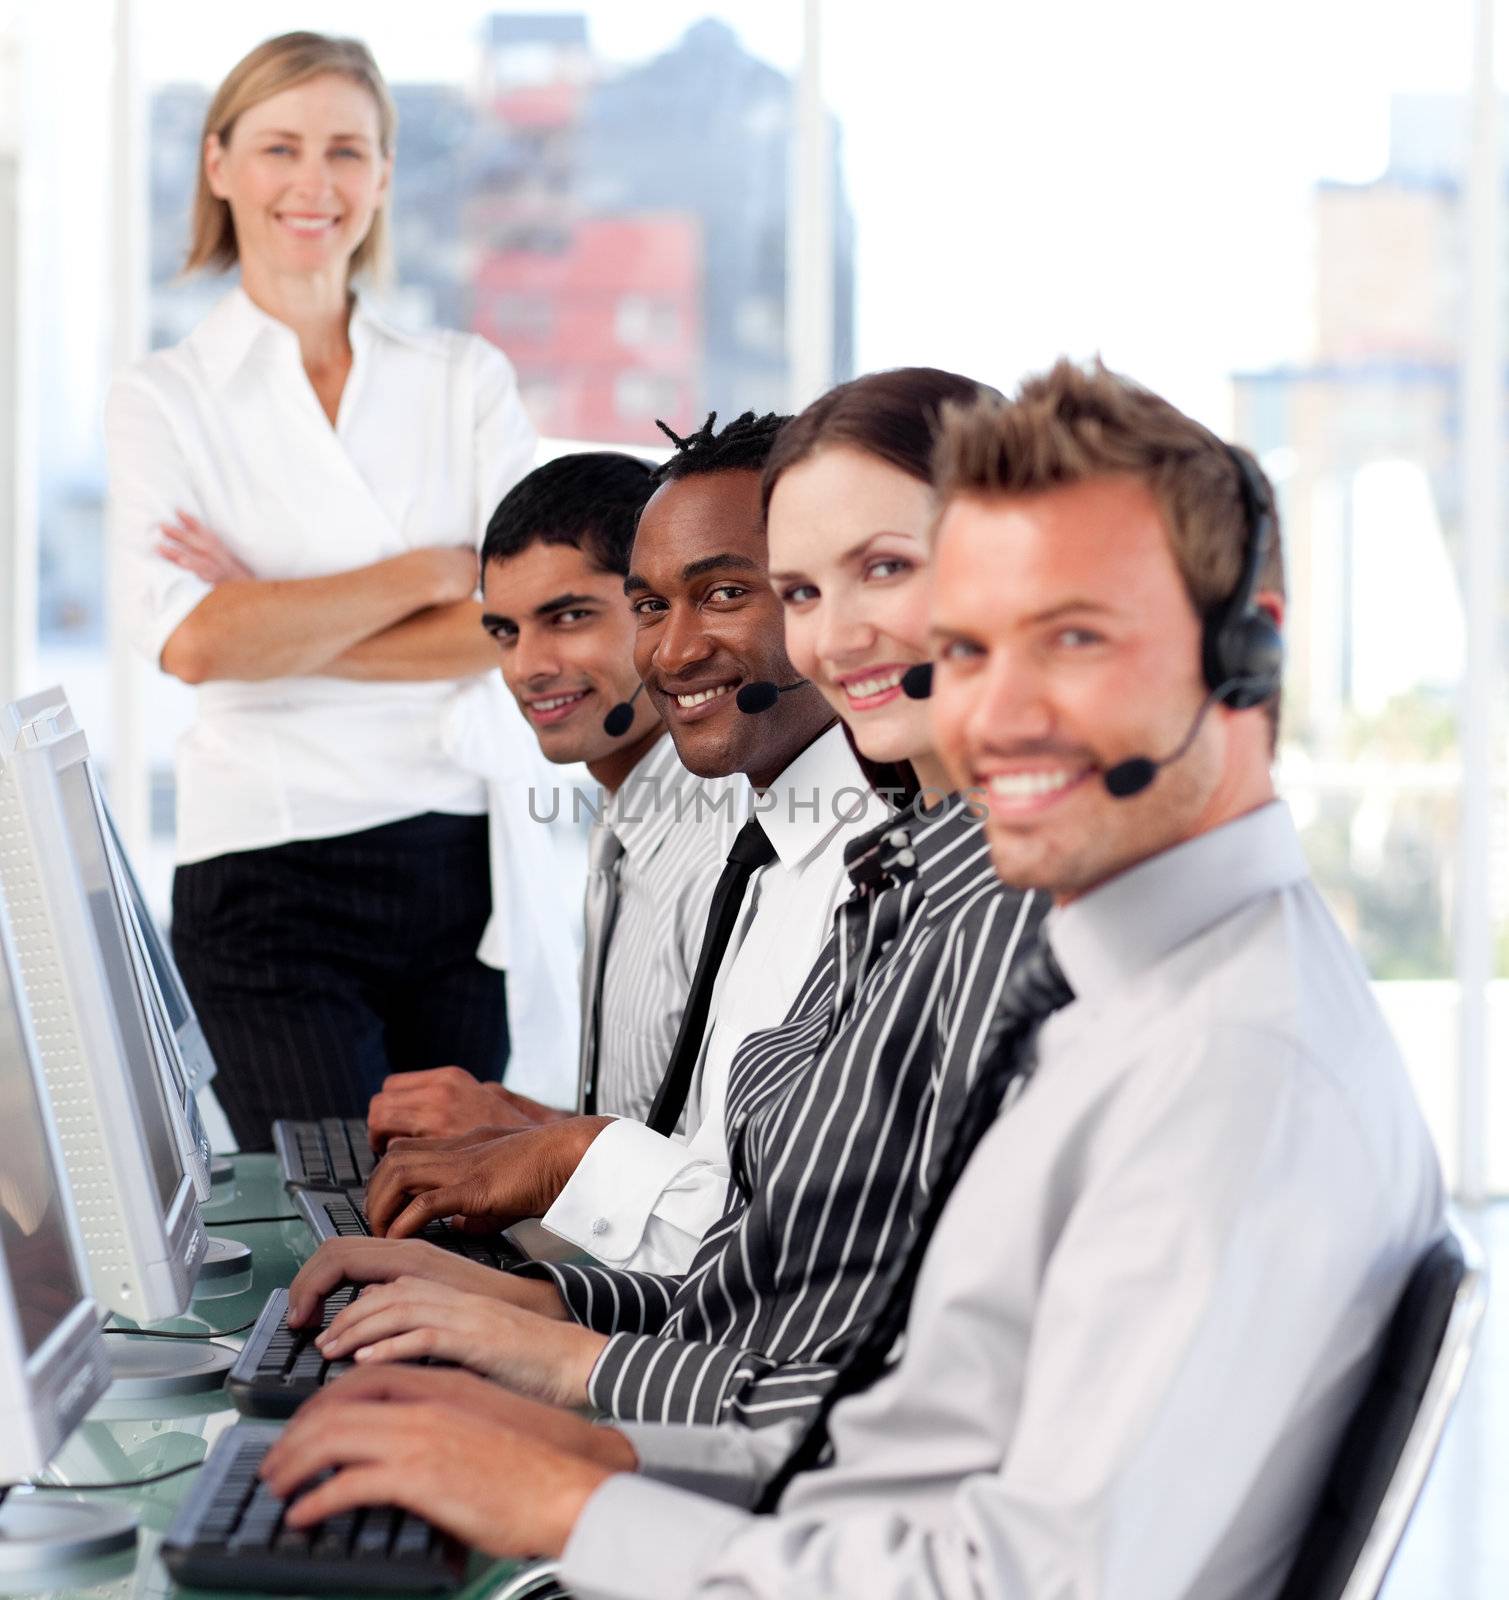 Business team in a call center